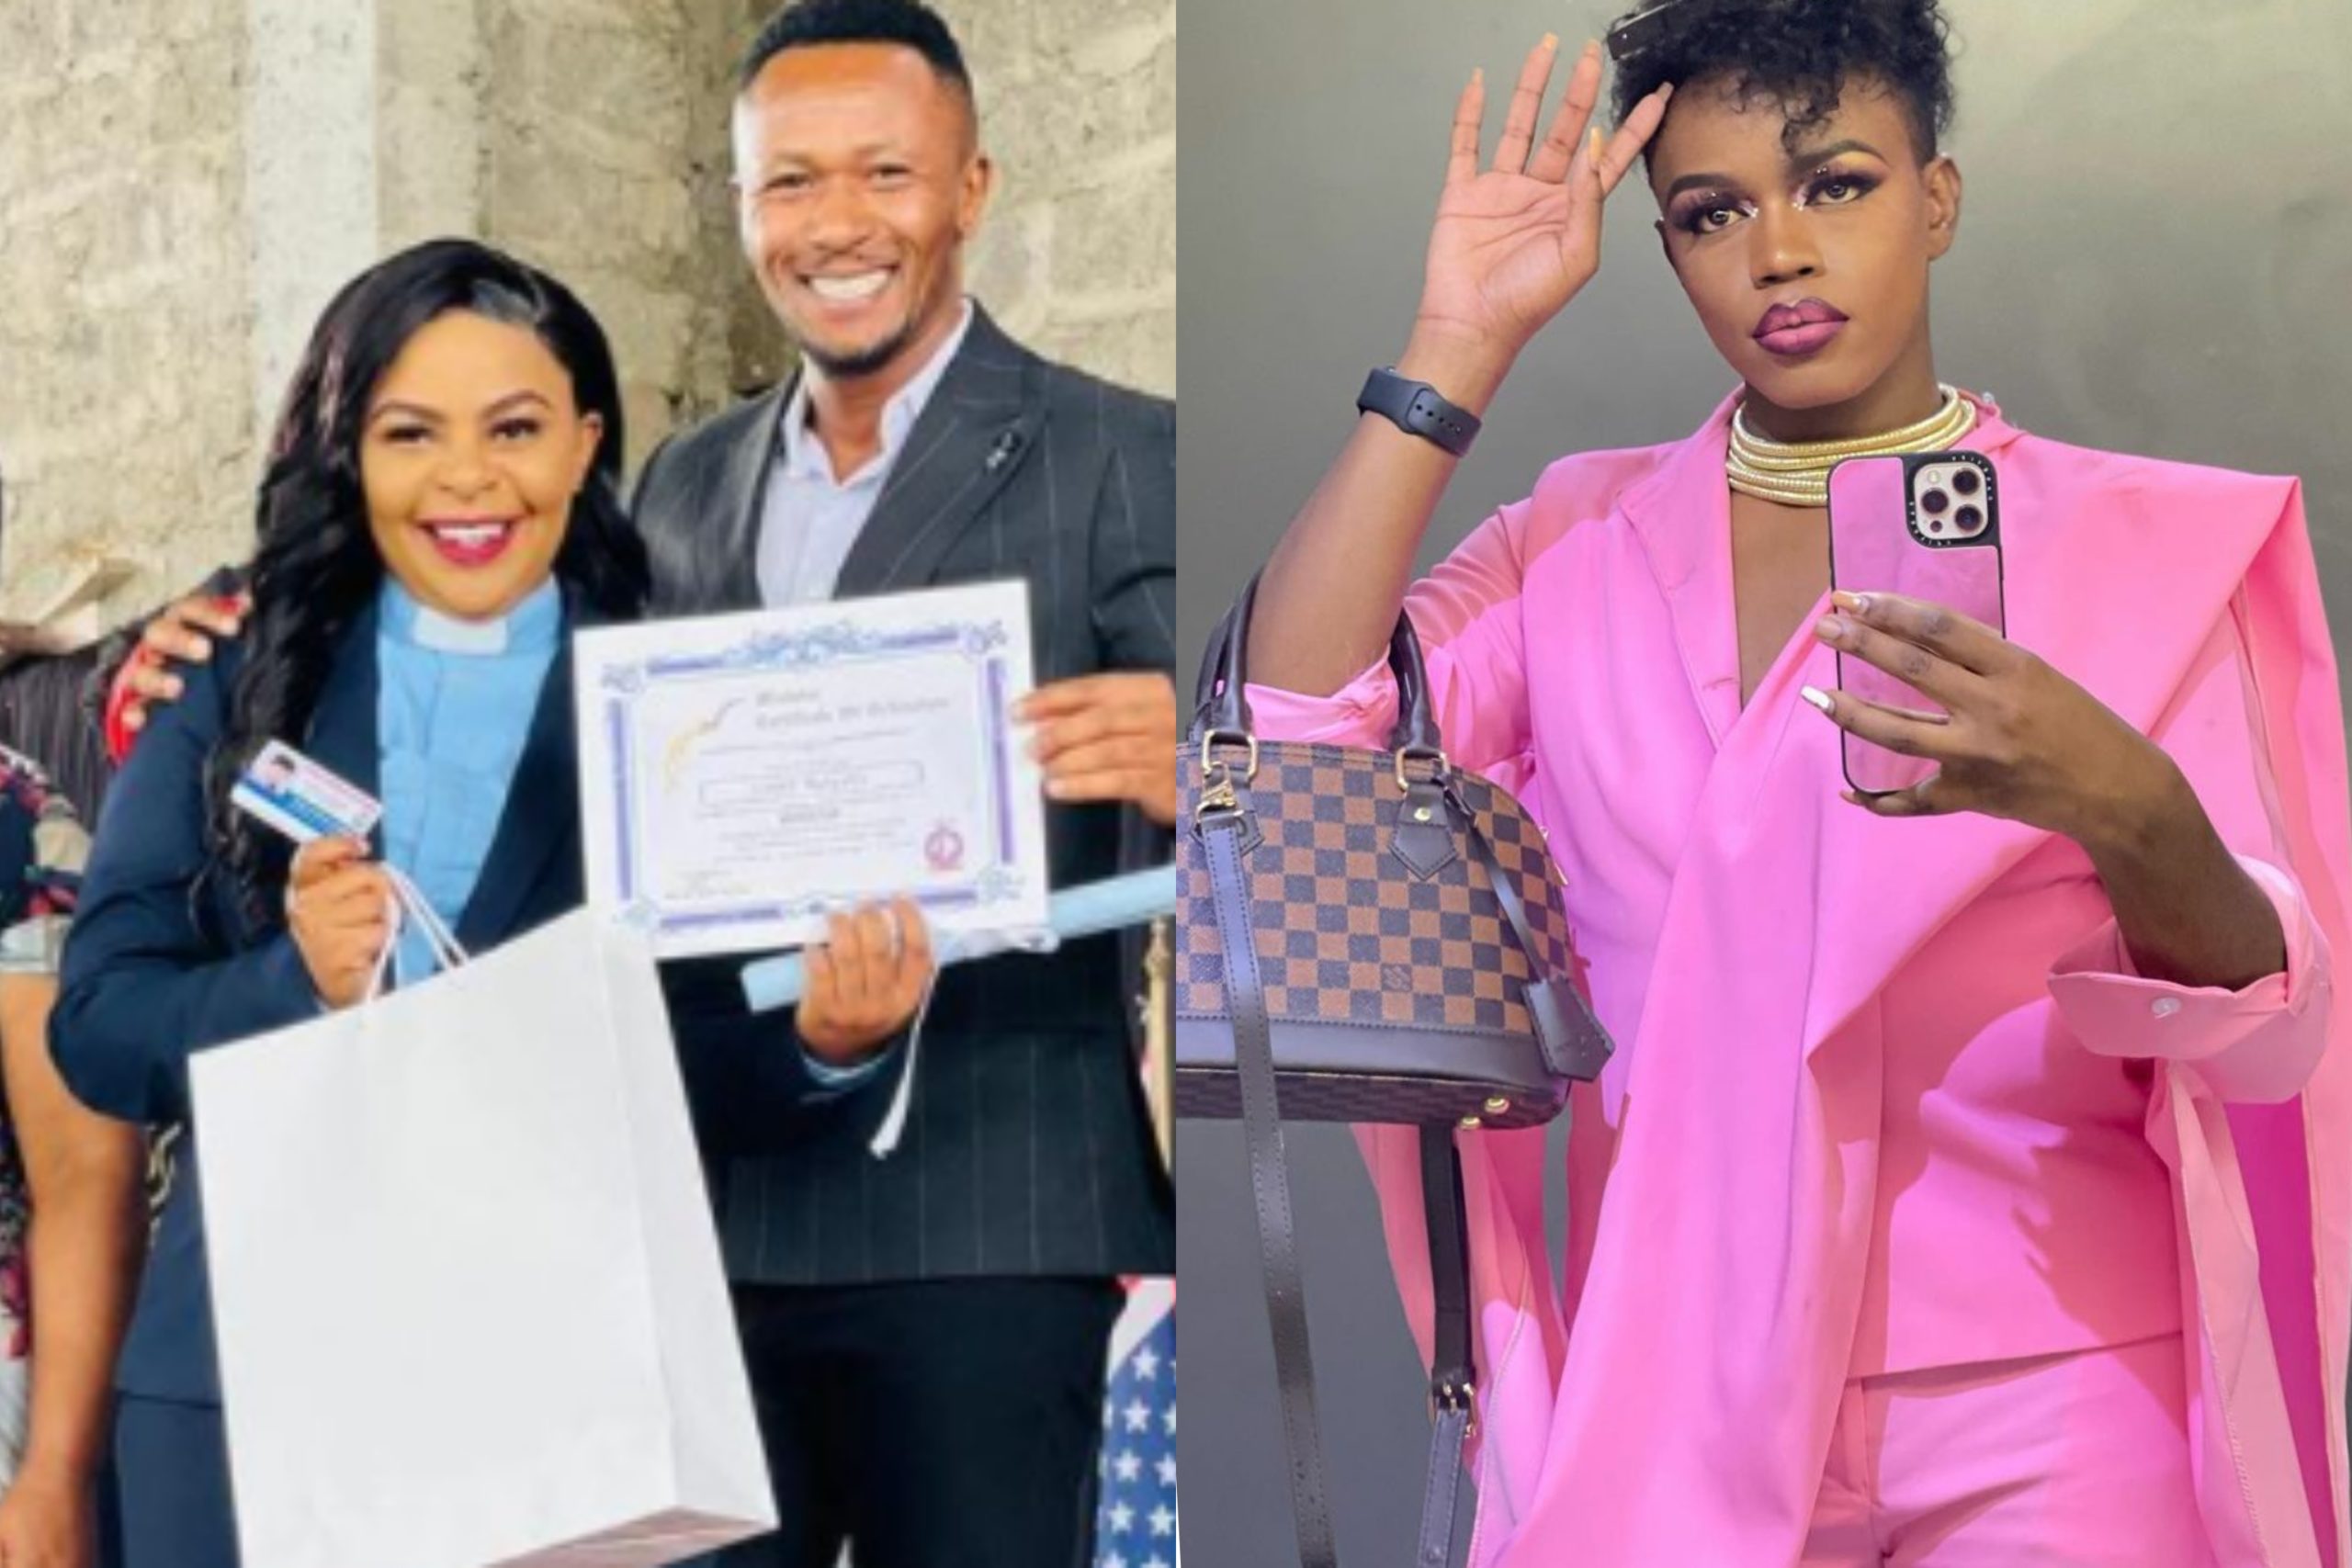 Size 8 has every right to deny services from an LGBTQ member